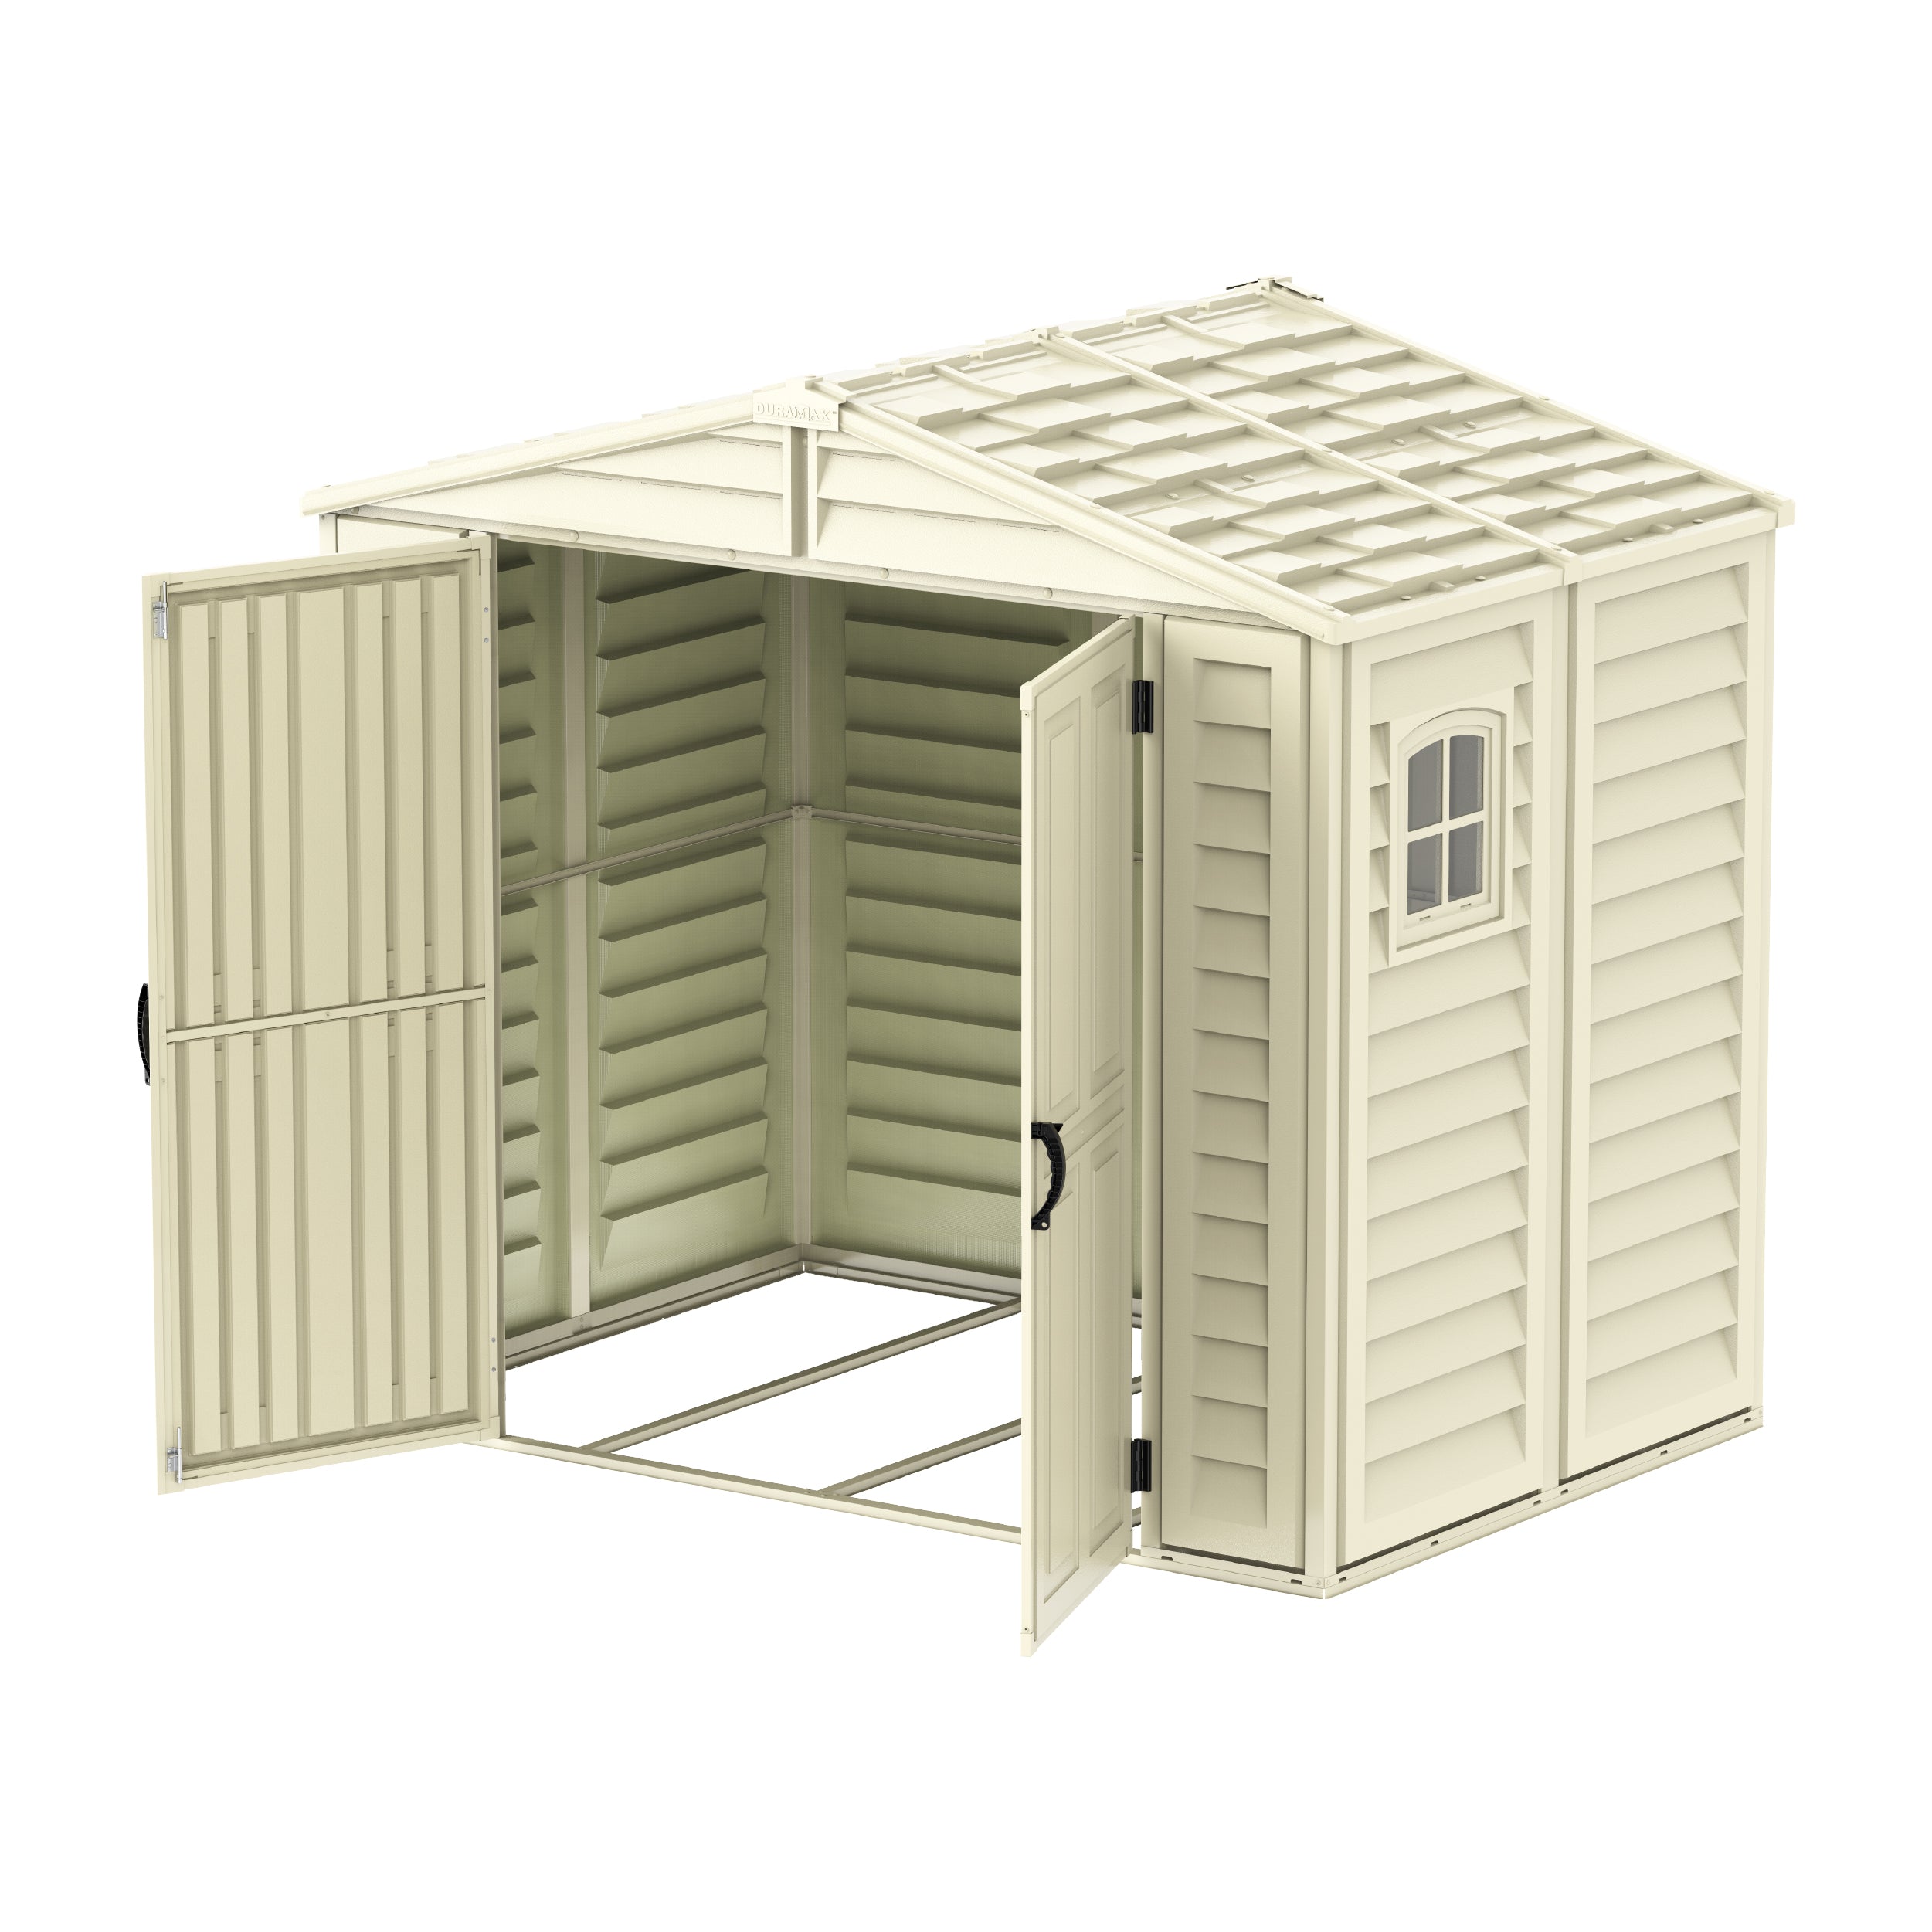 StoreAll 8x6ft Resin Garden Storage Shed